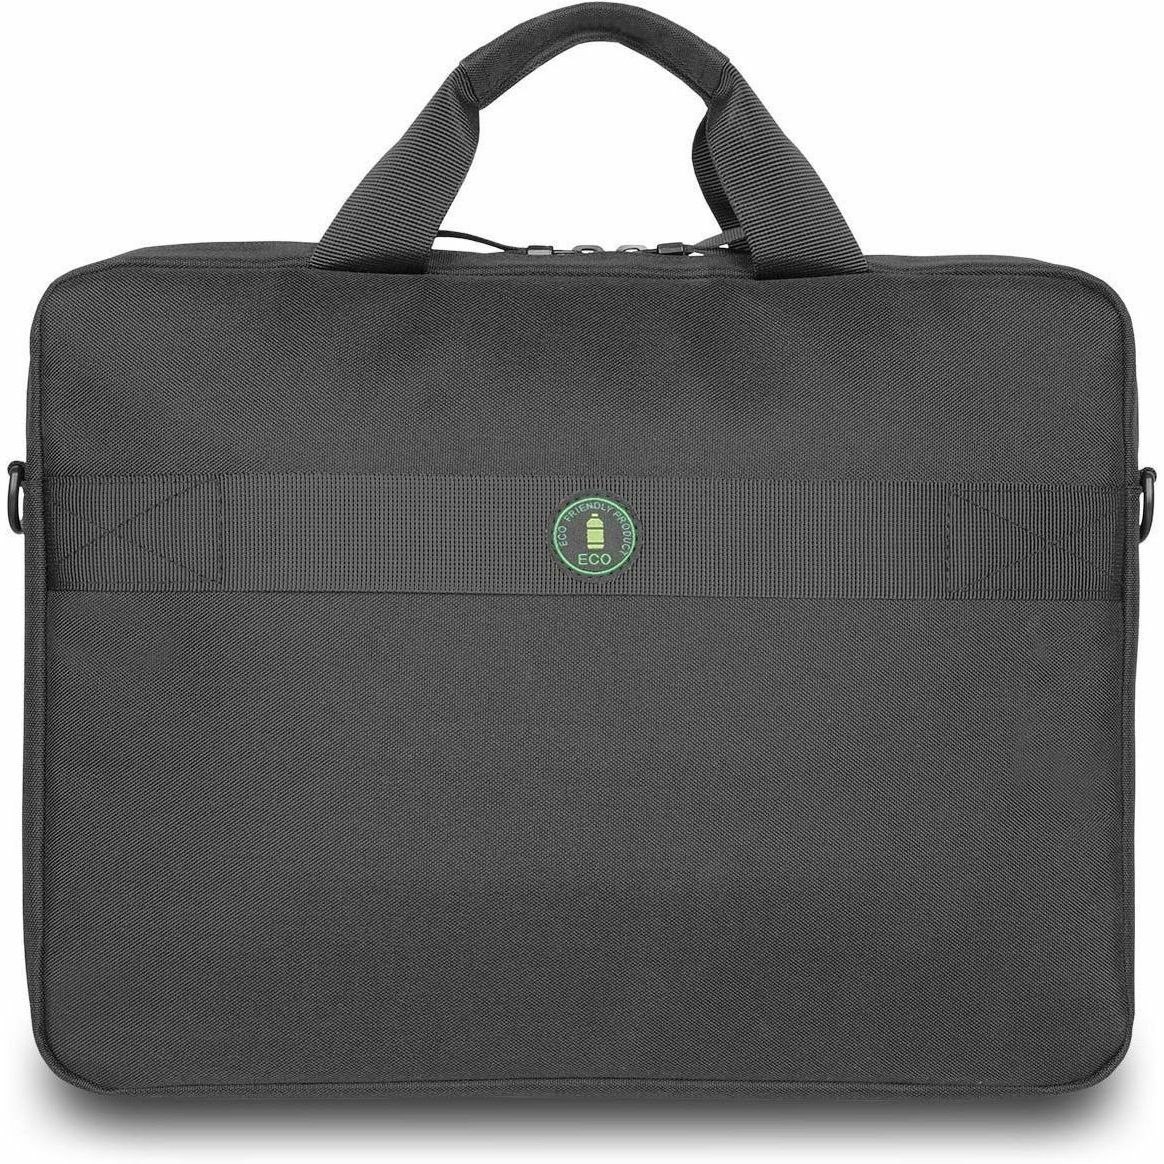 V7 Eco-Friendly CTP16-ECO2 Carrying Case (Briefcase) for 15.6" to 16" Notebook, Smartphone, Accessories, ID Card, Credit Card - Black